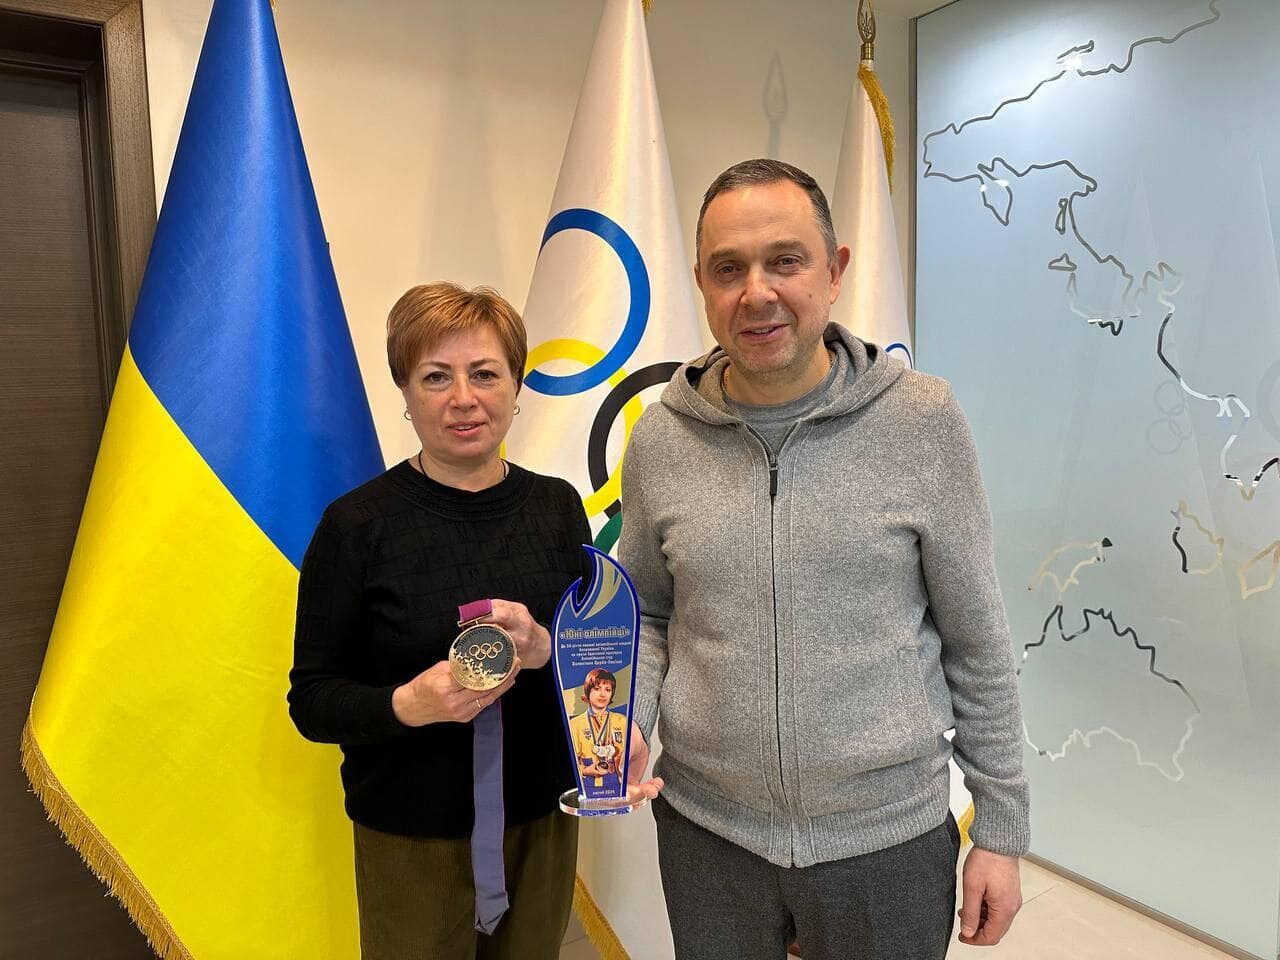 A Ukrainian woman won her historic biathlon medal in someone else's shoes and after her opponent fell: 30 years of our first independent Olympic medal